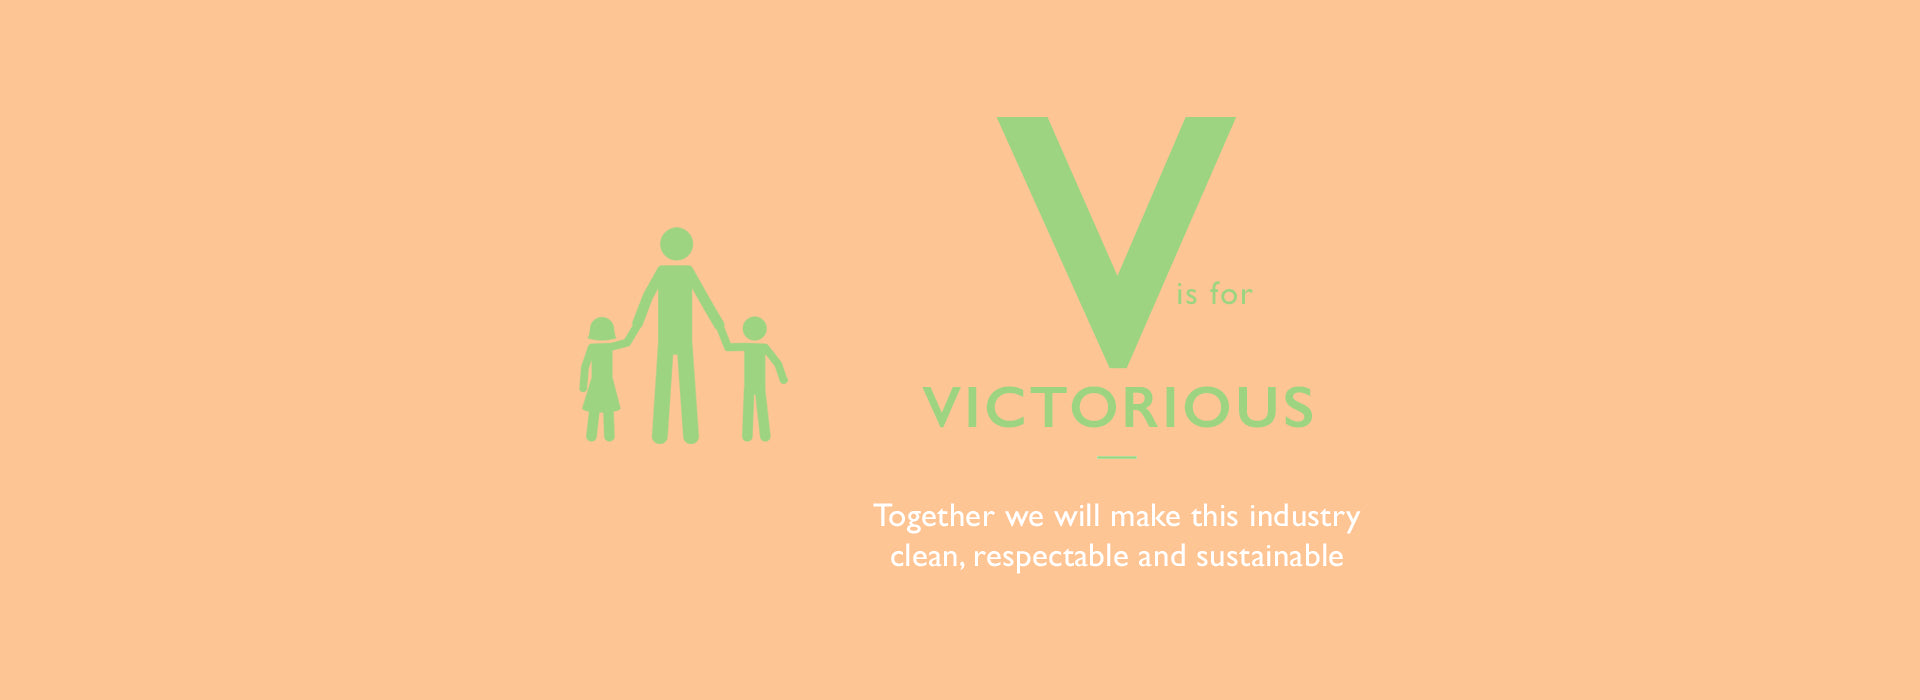 V is for Victorius. Together we will make this industry clean, respectable and sustainable